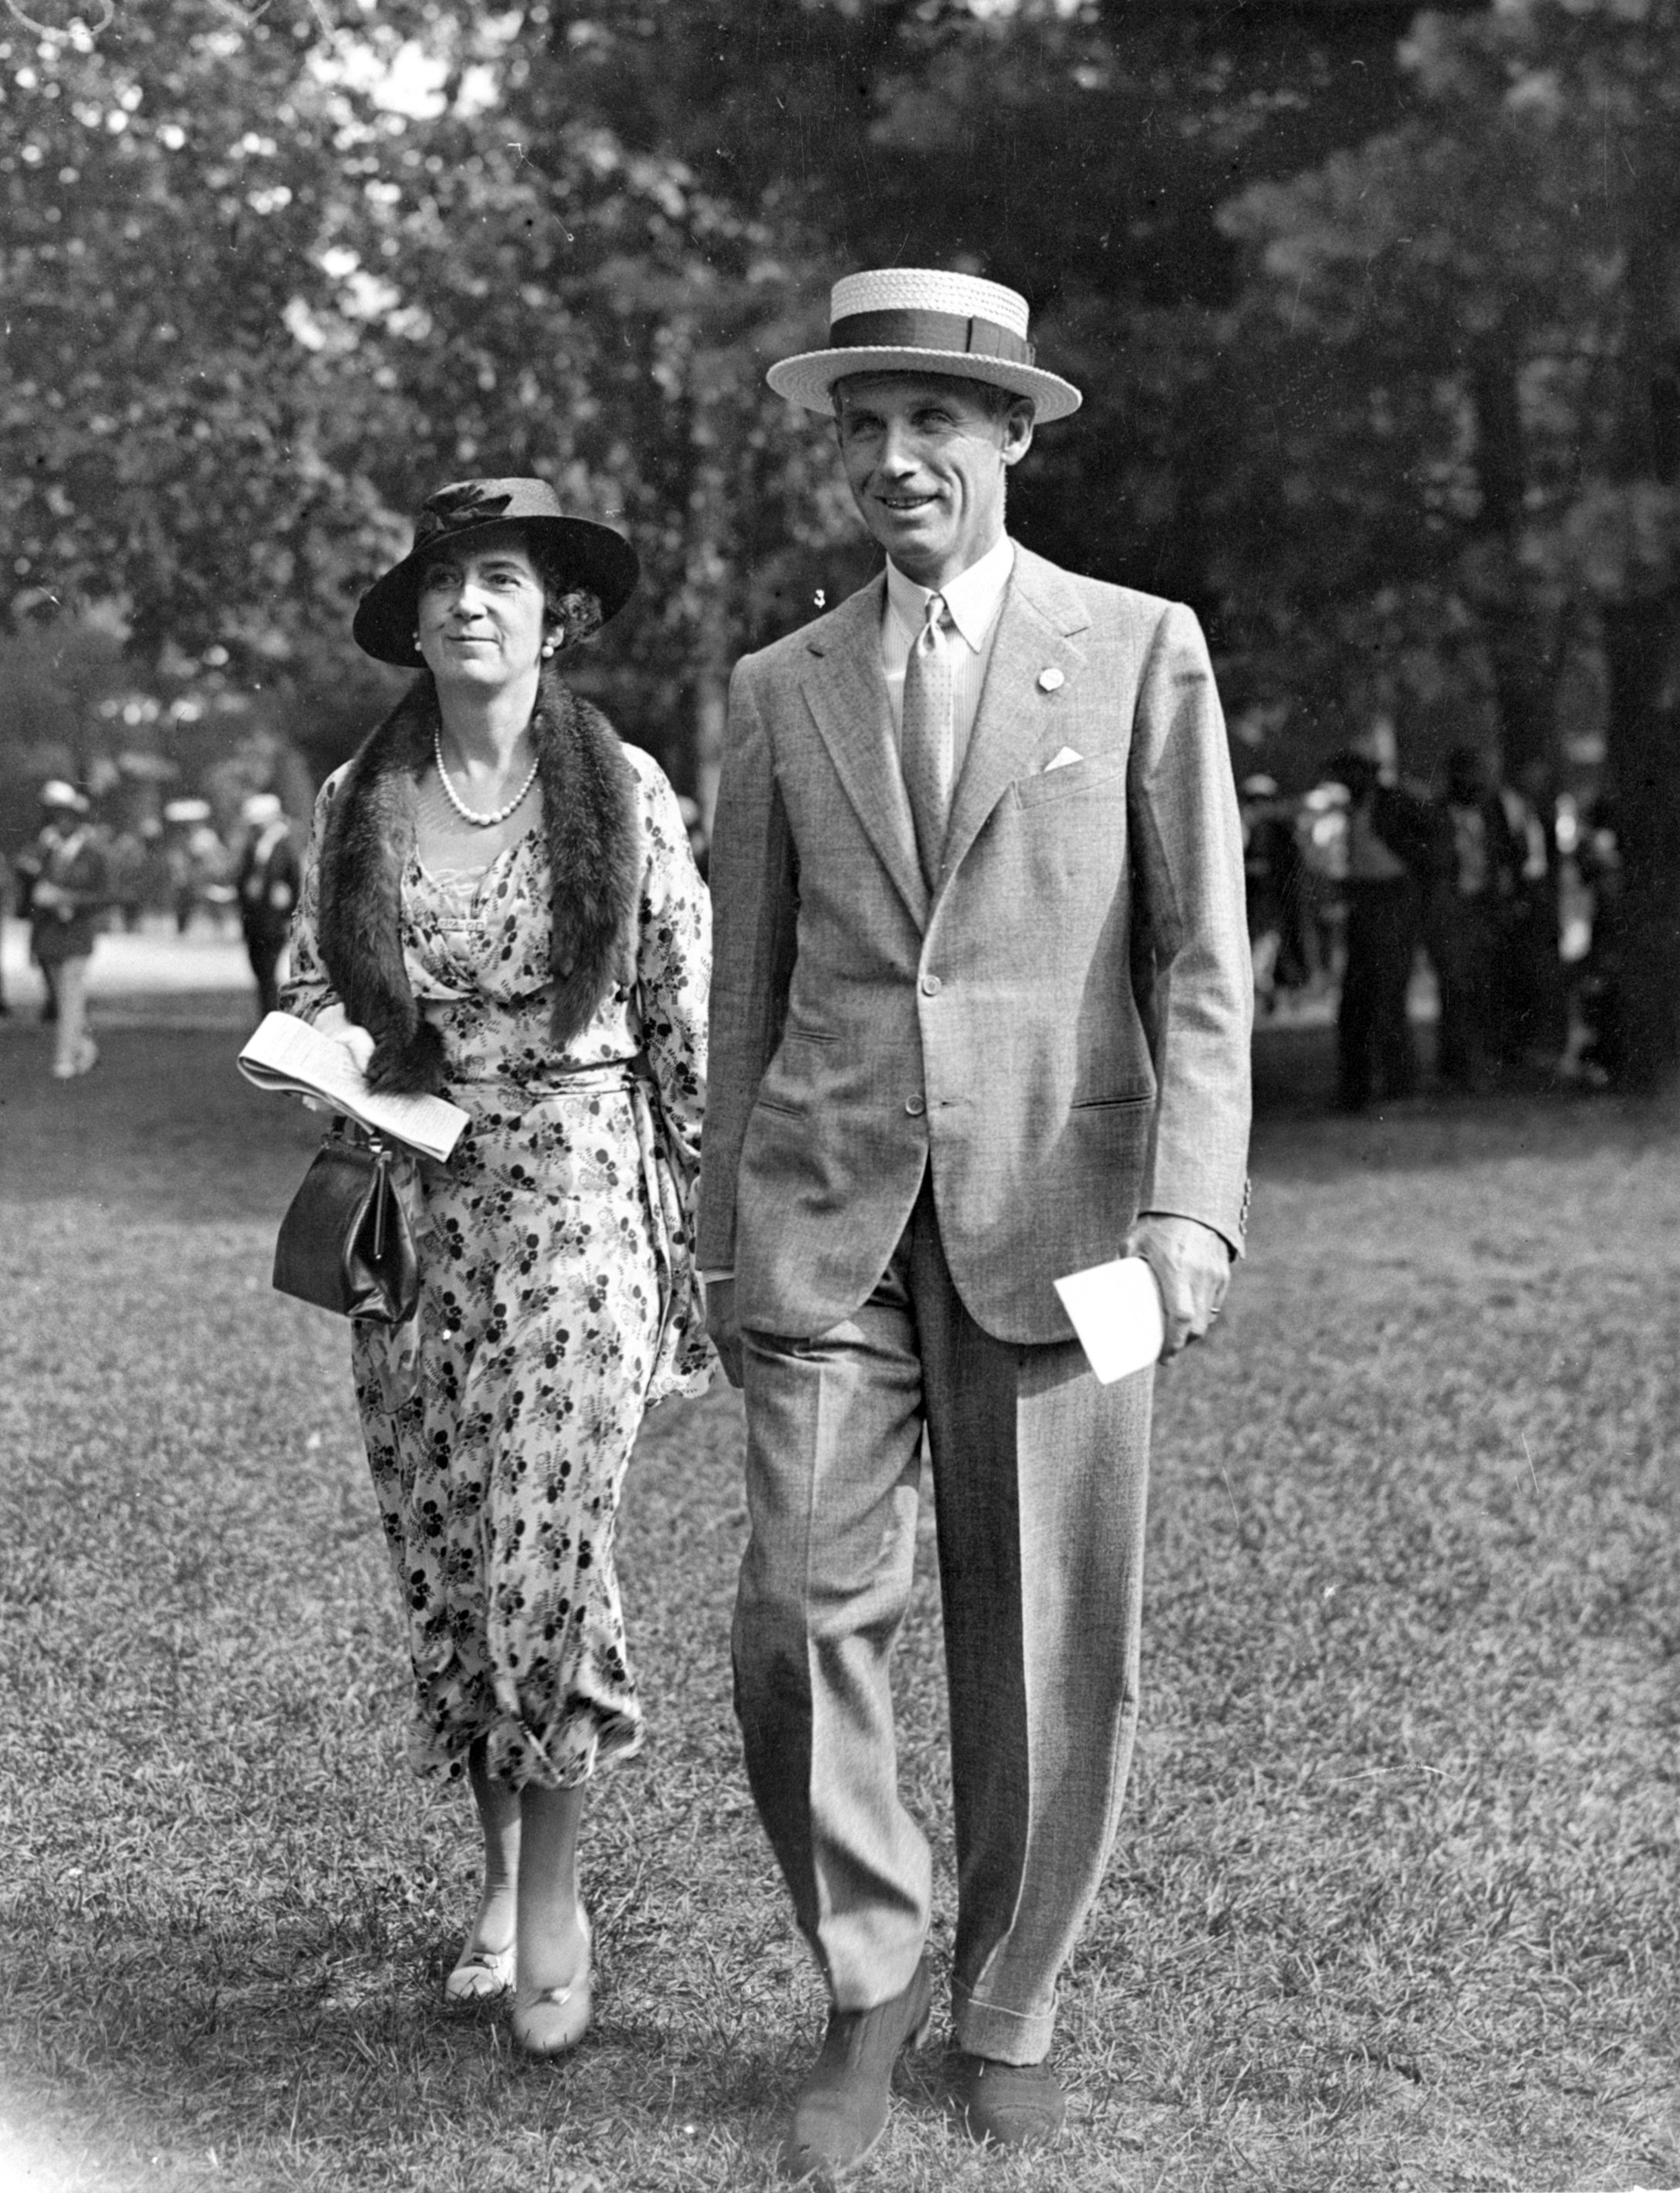 Mr. and Mrs. George D. Widener, Jr. at Belmont, 1933 (Keeneland Library Morgan Collection)